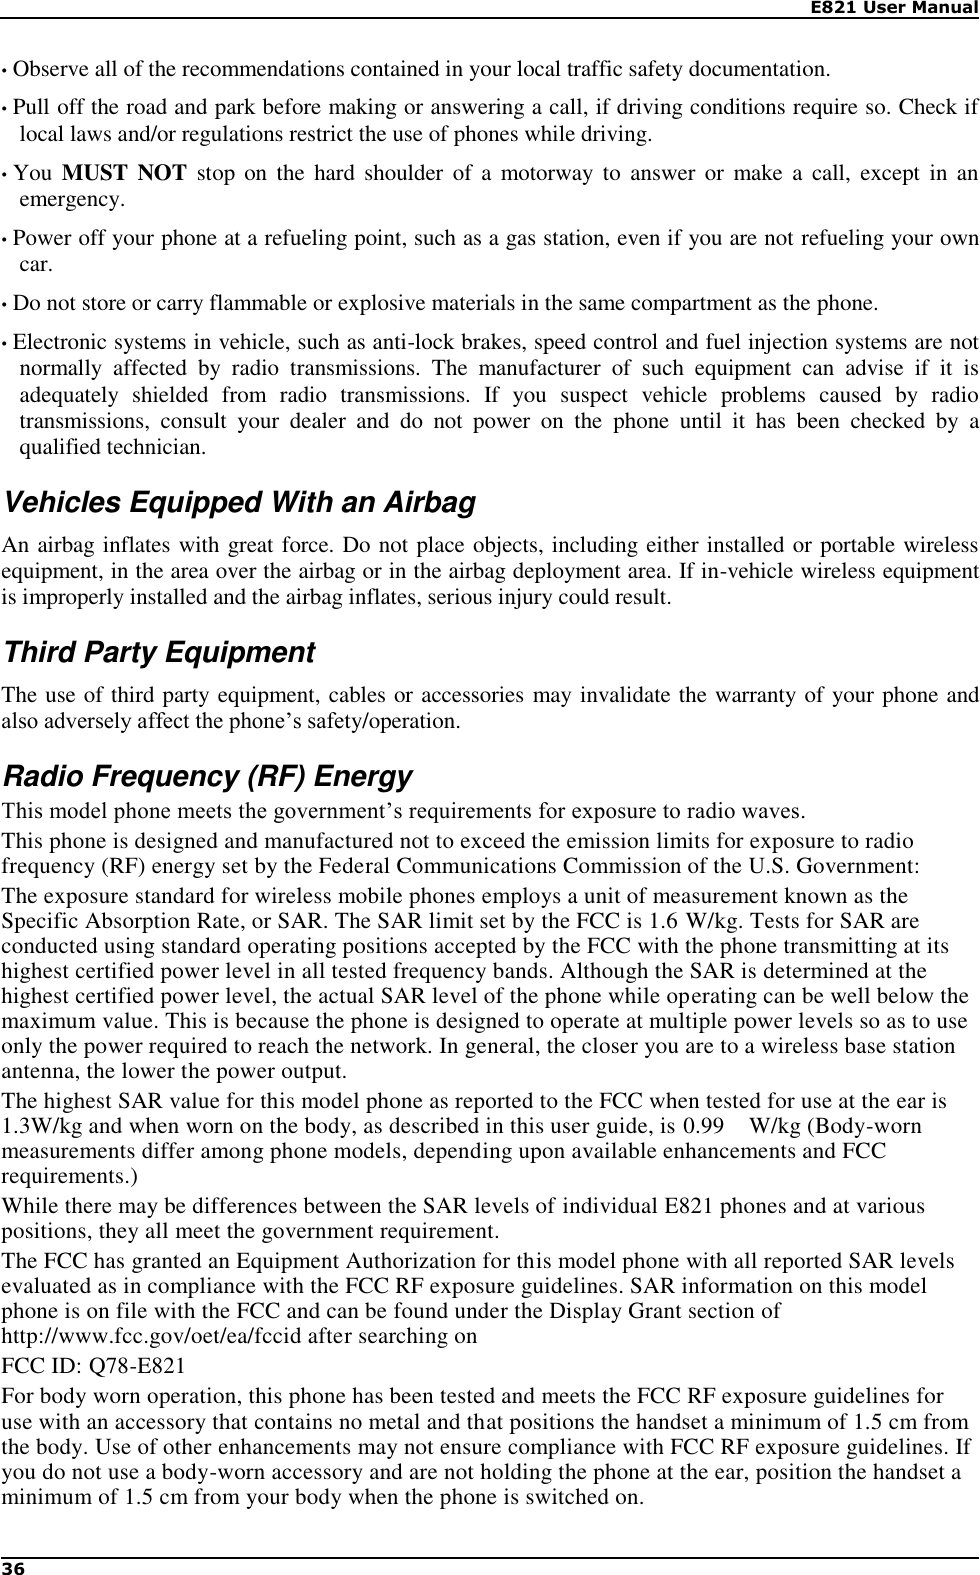    E821 User Manual 36  • Observe all of the recommendations contained in your local traffic safety documentation. • Pull off the road and park before making or answering a call, if driving conditions require so. Check if local laws and/or regulations restrict the use of phones while driving. • You  MUST NOT stop on  the  hard  shoulder  of a motorway  to  answer  or  make  a  call,  except  in  an emergency. • Power off your phone at a refueling point, such as a gas station, even if you are not refueling your own car. • Do not store or carry flammable or explosive materials in the same compartment as the phone. • Electronic systems in vehicle, such as anti-lock brakes, speed control and fuel injection systems are not normally  affected  by  radio  transmissions.  The  manufacturer  of  such  equipment  can  advise  if  it  is adequately  shielded  from  radio  transmissions.  If  you  suspect  vehicle  problems  caused  by  radio transmissions,  consult  your  dealer  and  do  not  power  on  the  phone  until  it  has  been  checked  by  a qualified technician. Vehicles Equipped With an Airbag An airbag inflates with great force. Do not place objects, including either installed or portable wireless equipment, in the area over the airbag or in the airbag deployment area. If in-vehicle wireless equipment is improperly installed and the airbag inflates, serious injury could result. Third Party Equipment The use of third party equipment, cables or accessories may invalidate the warranty of your phone and also adversely affect the phone’s safety/operation. Radio Frequency (RF) Energy This model phone meets the government’s requirements for exposure to radio waves.  This phone is designed and manufactured not to exceed the emission limits for exposure to radio frequency (RF) energy set by the Federal Communications Commission of the U.S. Government: The exposure standard for wireless mobile phones employs a unit of measurement known as the Specific Absorption Rate, or SAR. The SAR limit set by the FCC is 1.6 W/kg. Tests for SAR are conducted using standard operating positions accepted by the FCC with the phone transmitting at its highest certified power level in all tested frequency bands. Although the SAR is determined at the highest certified power level, the actual SAR level of the phone while operating can be well below the maximum value. This is because the phone is designed to operate at multiple power levels so as to use only the power required to reach the network. In general, the closer you are to a wireless base station antenna, the lower the power output. The highest SAR value for this model phone as reported to the FCC when tested for use at the ear is 1.3W/kg and when worn on the body, as described in this user guide, is 0.99    W/kg (Body-worn measurements differ among phone models, depending upon available enhancements and FCC requirements.) While there may be differences between the SAR levels of individual E821 phones and at various positions, they all meet the government requirement. The FCC has granted an Equipment Authorization for this model phone with all reported SAR levels evaluated as in compliance with the FCC RF exposure guidelines. SAR information on this model phone is on file with the FCC and can be found under the Display Grant section of http://www.fcc.gov/oet/ea/fccid after searching on   FCC ID: Q78-E821    For body worn operation, this phone has been tested and meets the FCC RF exposure guidelines for use with an accessory that contains no metal and that positions the handset a minimum of 1.5 cm from the body. Use of other enhancements may not ensure compliance with FCC RF exposure guidelines. If you do not use a body-worn accessory and are not holding the phone at the ear, position the handset a minimum of 1.5 cm from your body when the phone is switched on. 